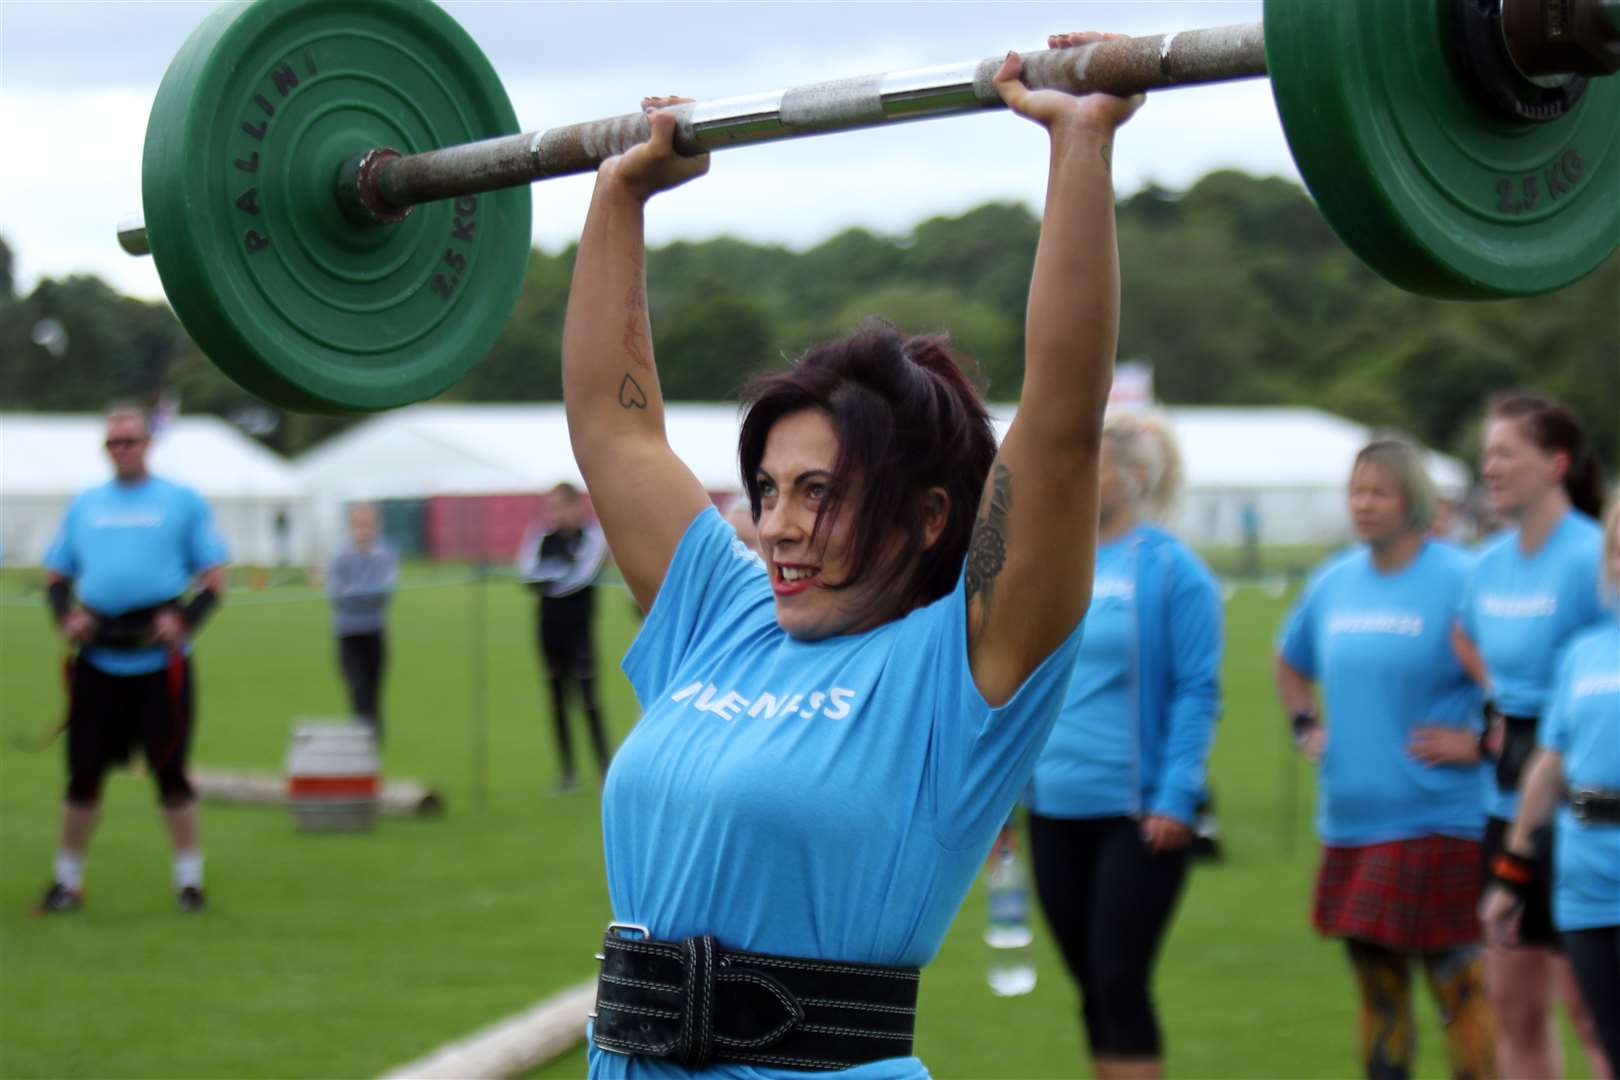 Strongwoman and strongman events are among the highlights.